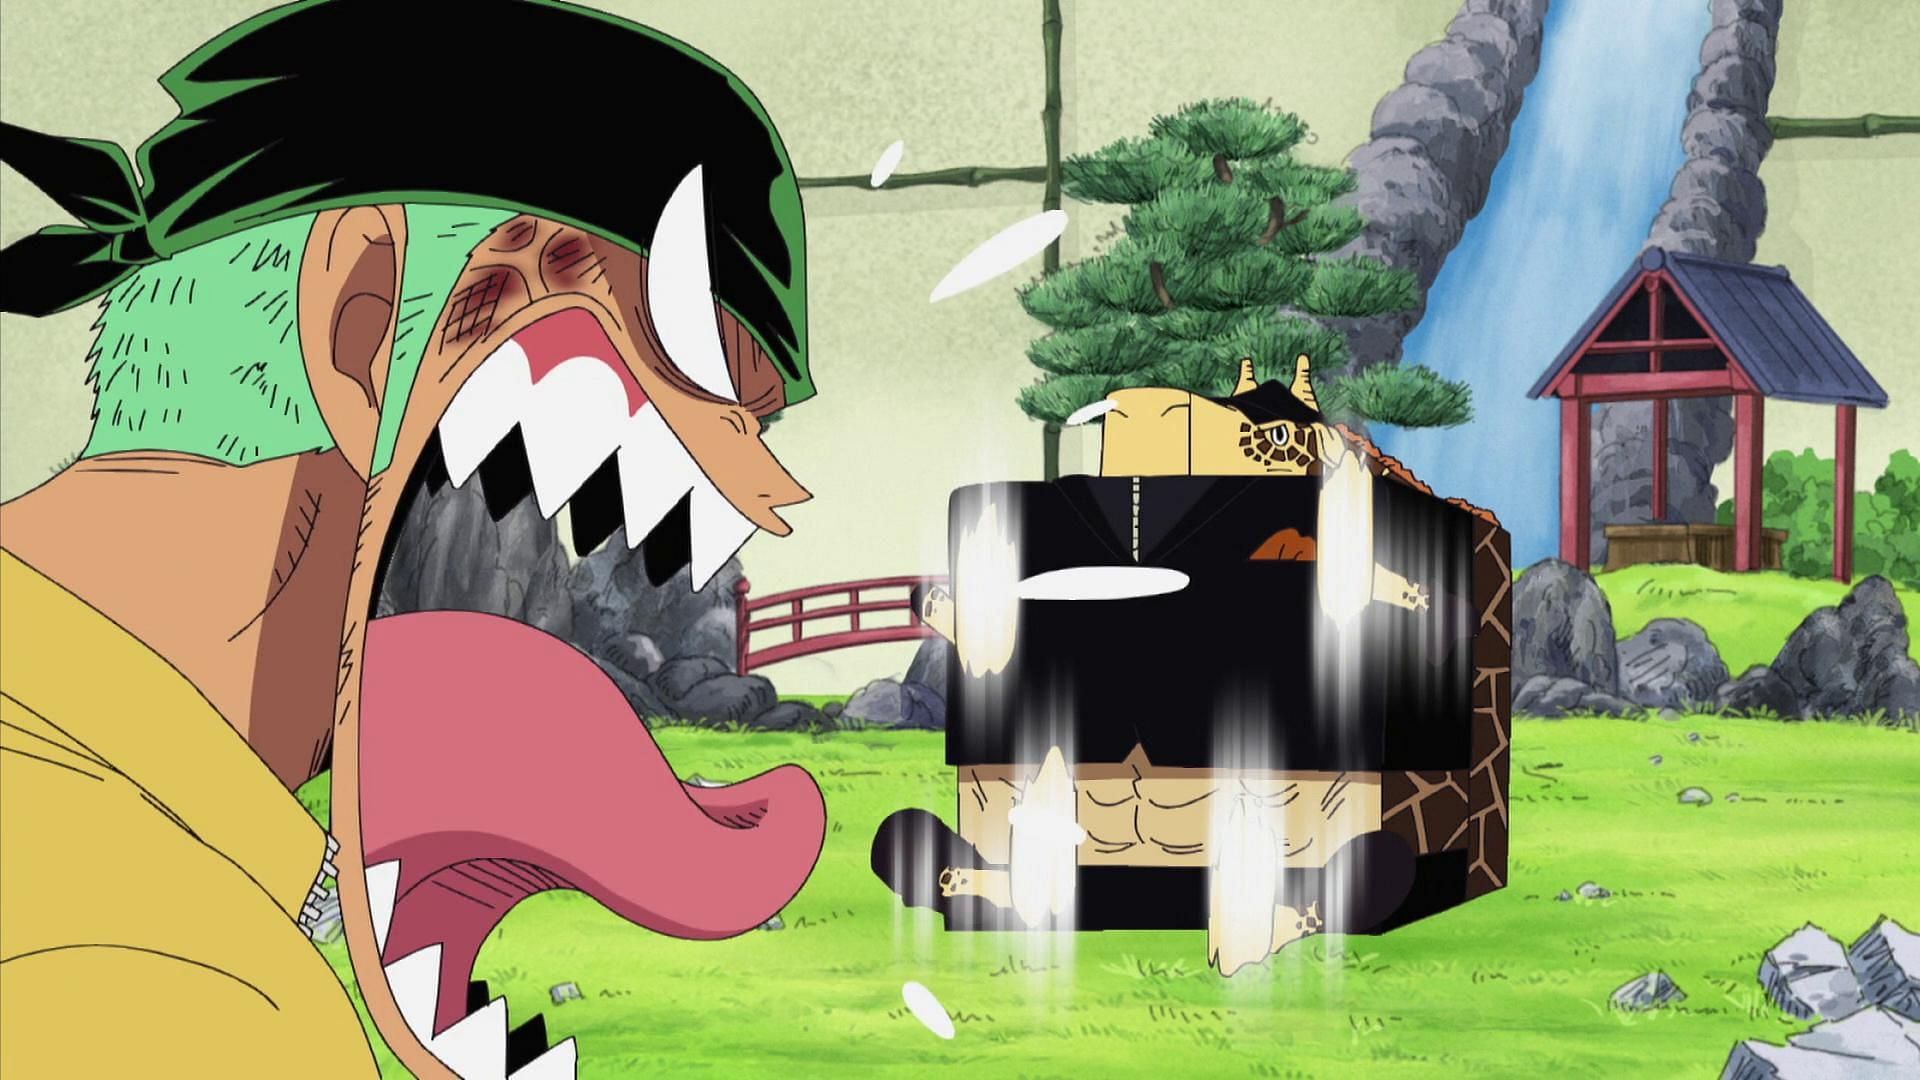 piece: One Piece Episode 1076: Check release date, time, how to